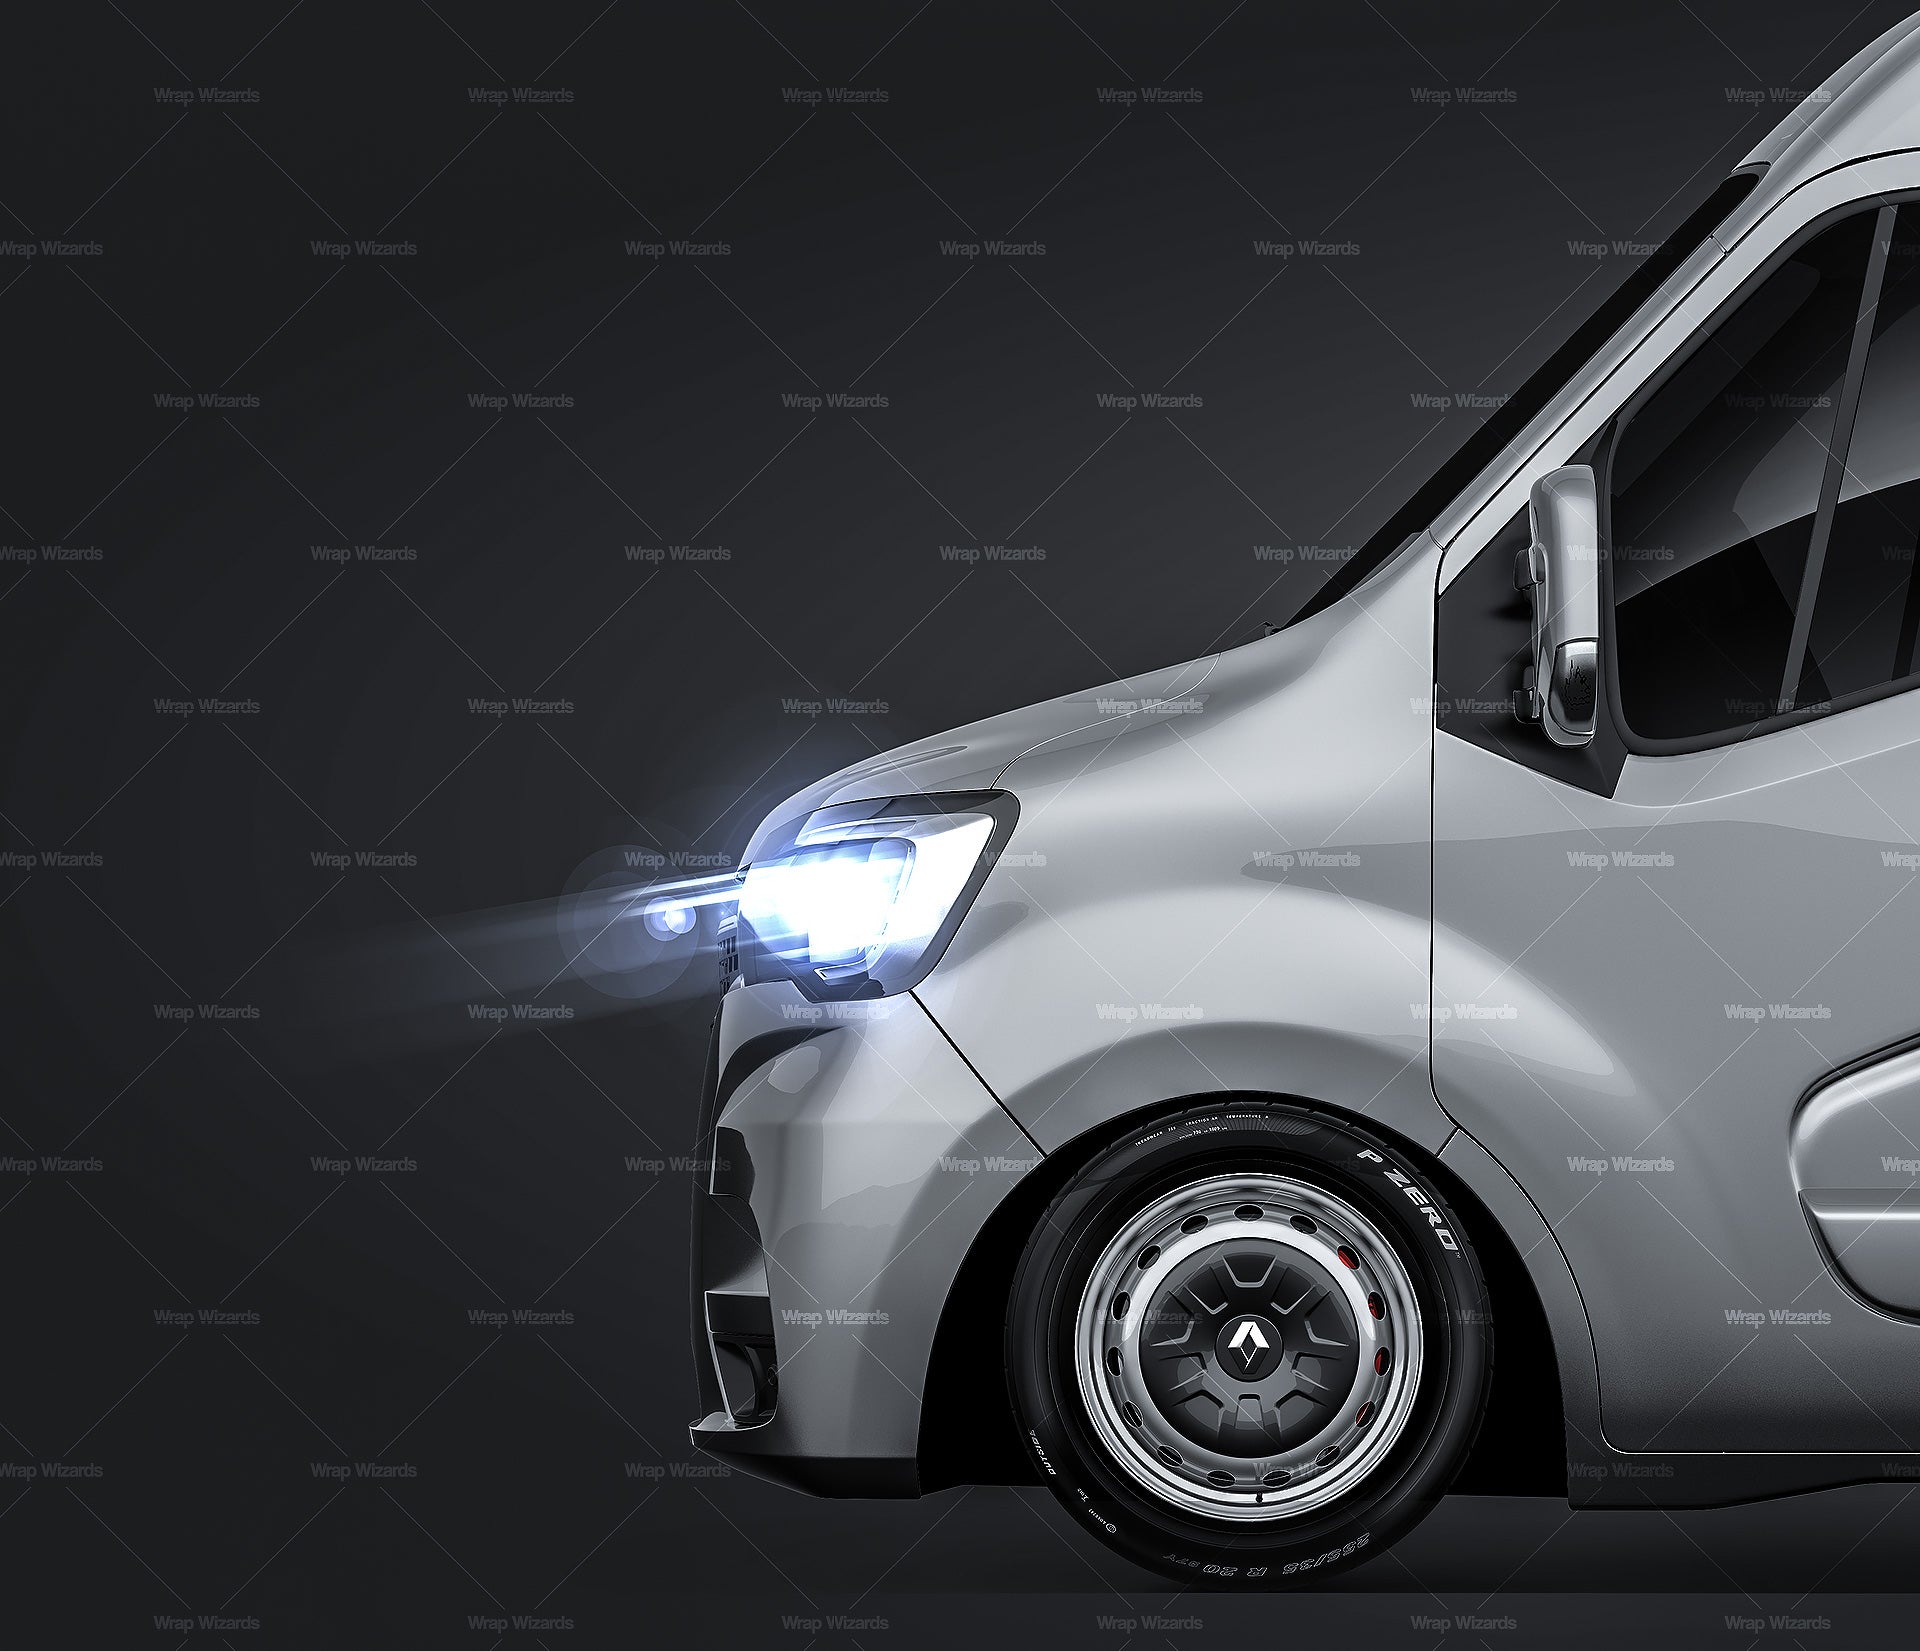 Renault Master L2H2 glossy finish - all sides Car Mockup Template.psd